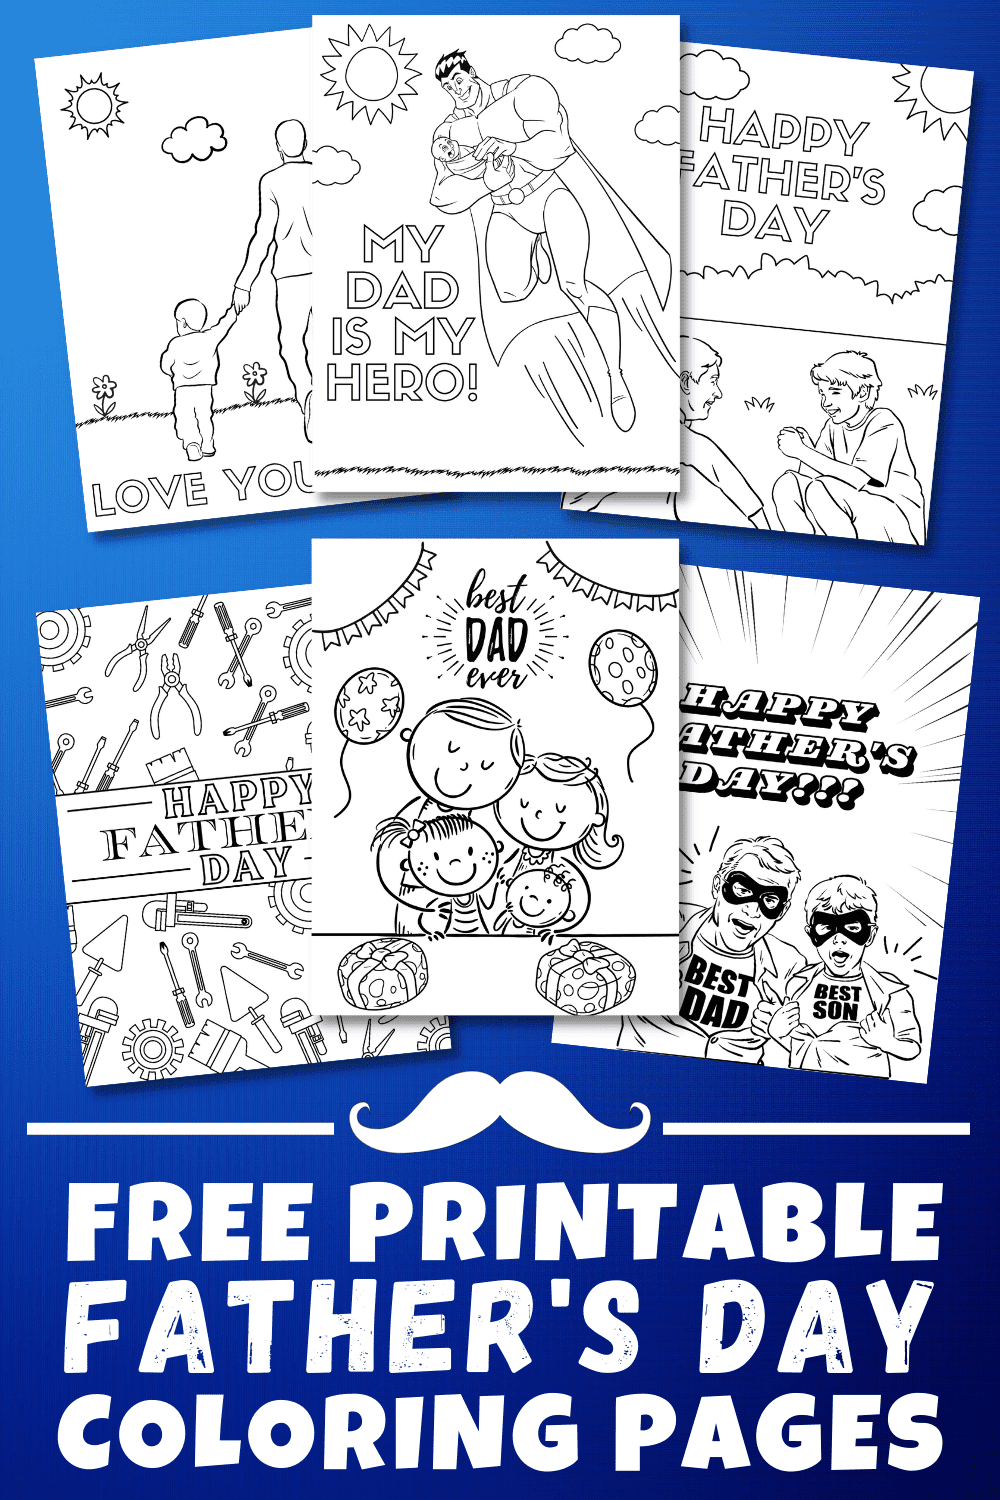 free printable Father's Day coloring pages for kids